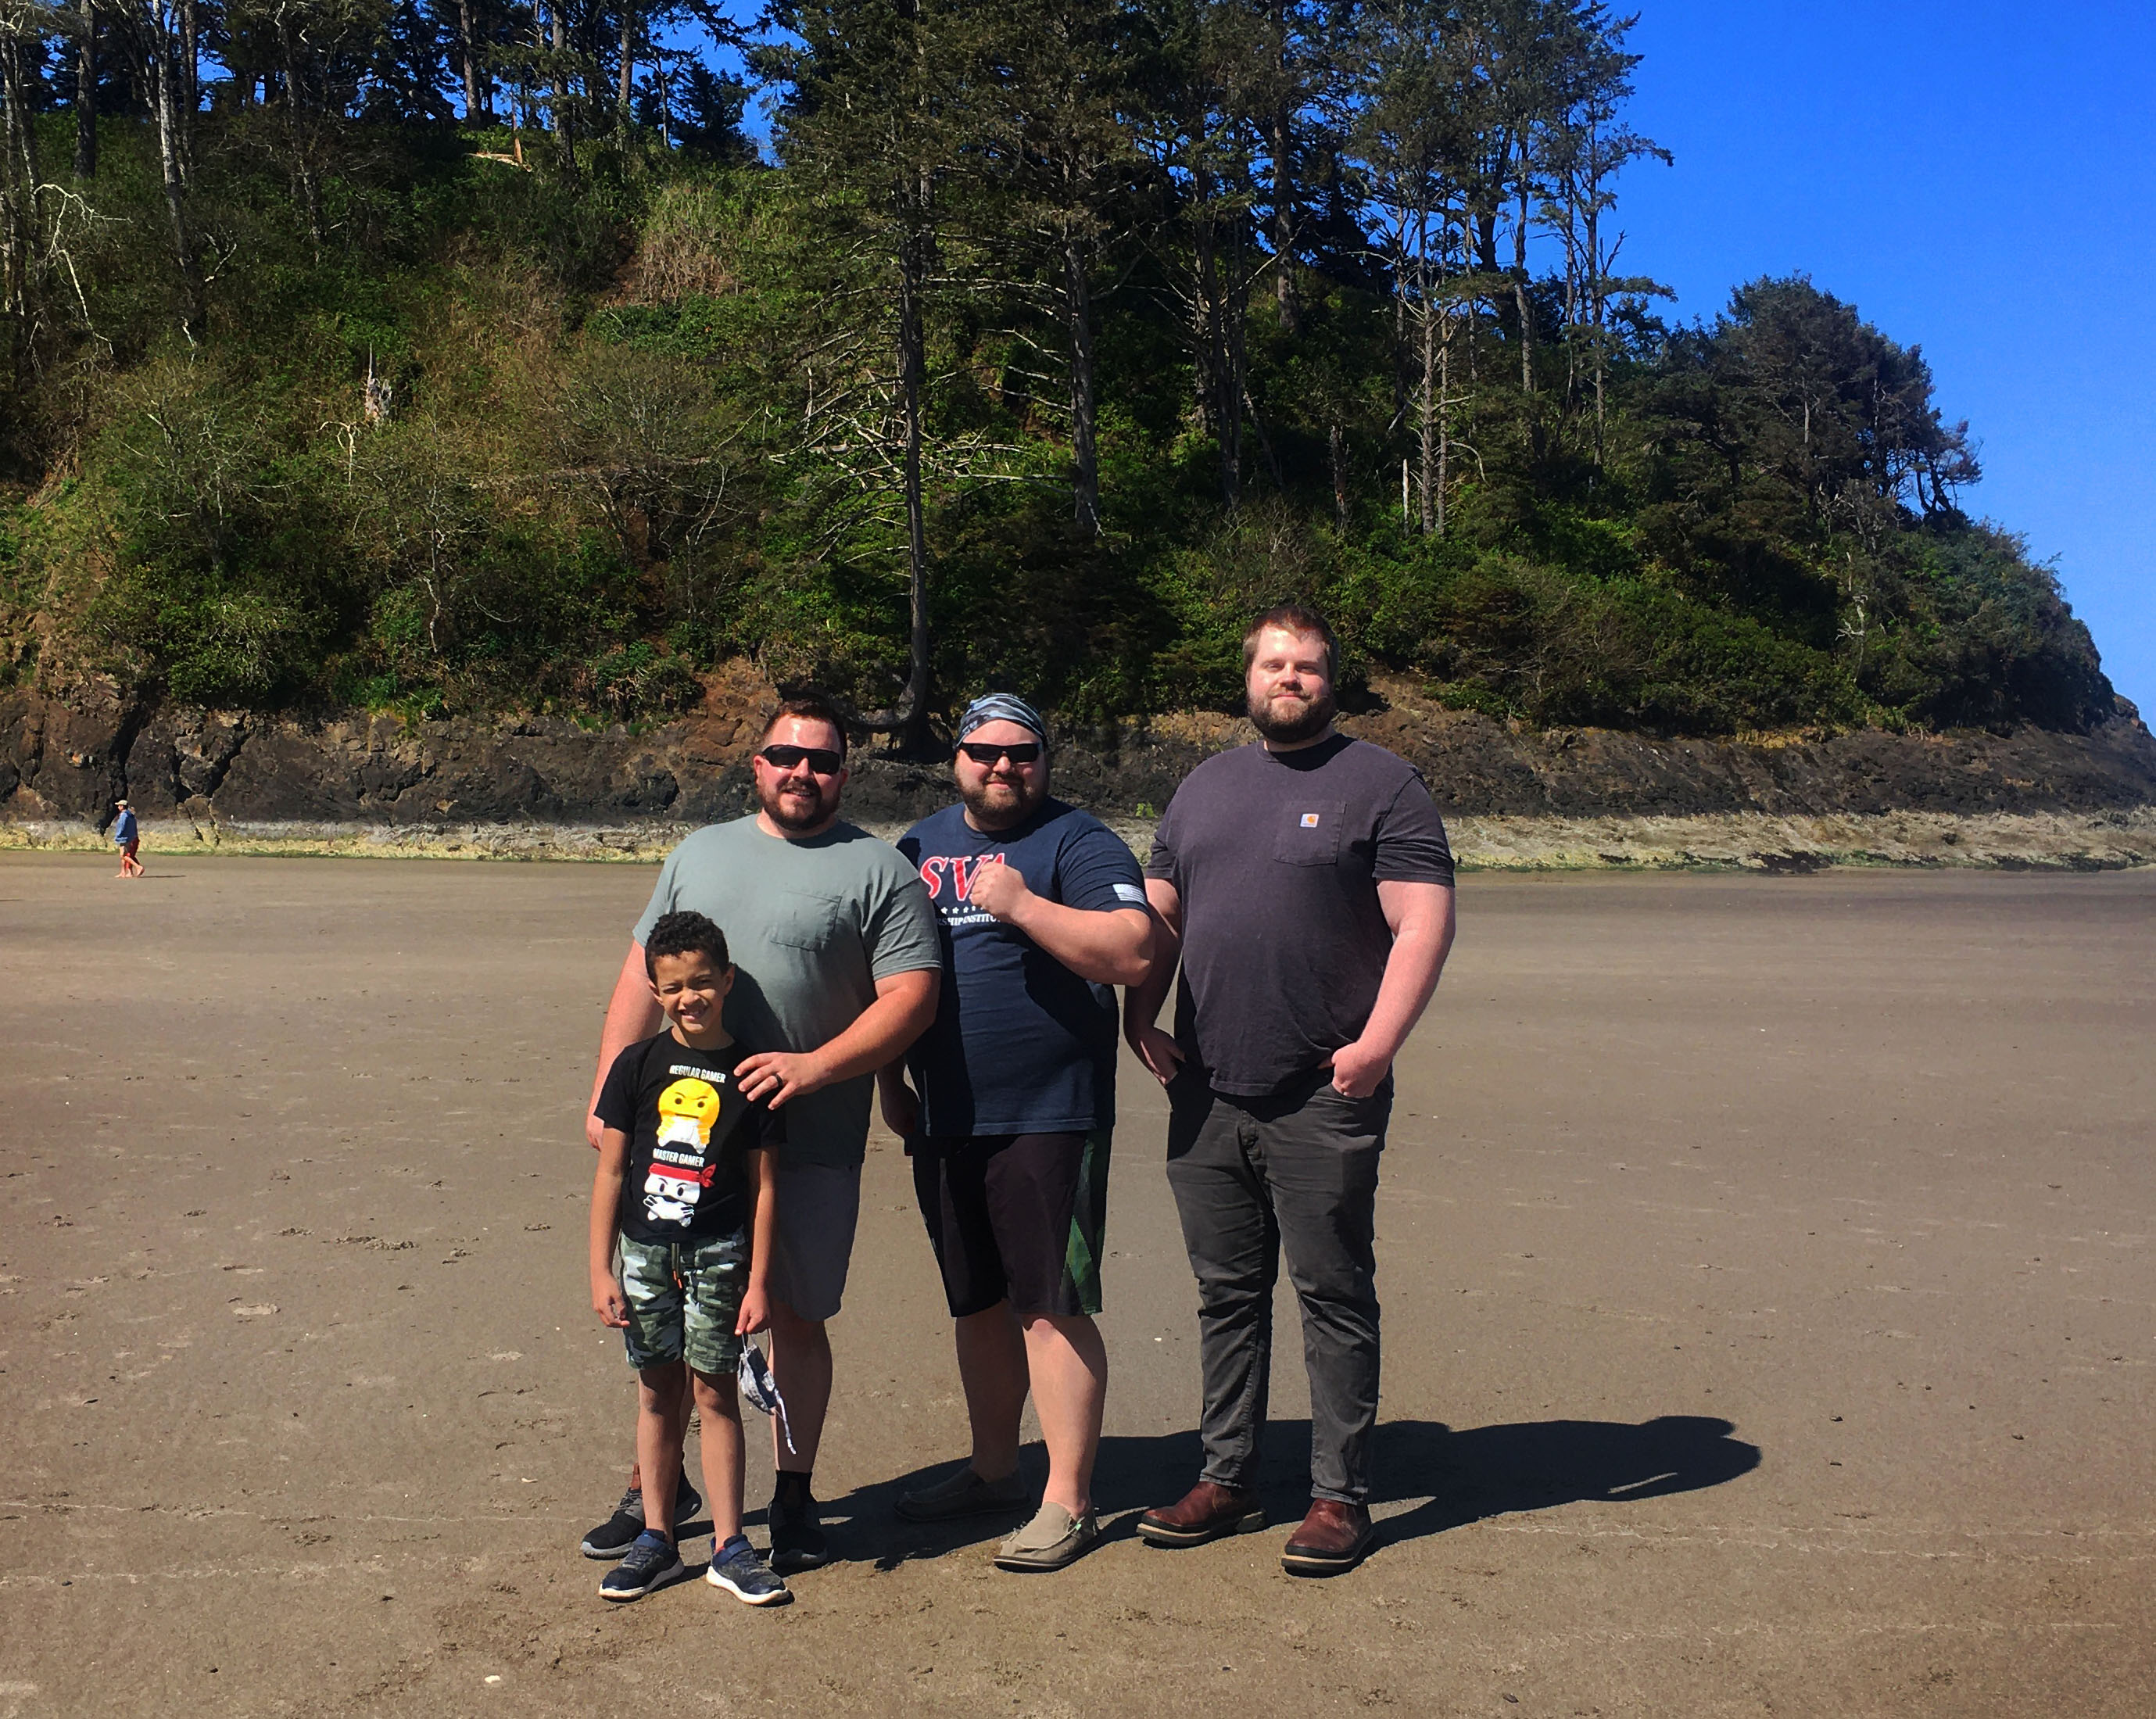 WOU veterans kick off Earth Day weekend on the Oregon coast